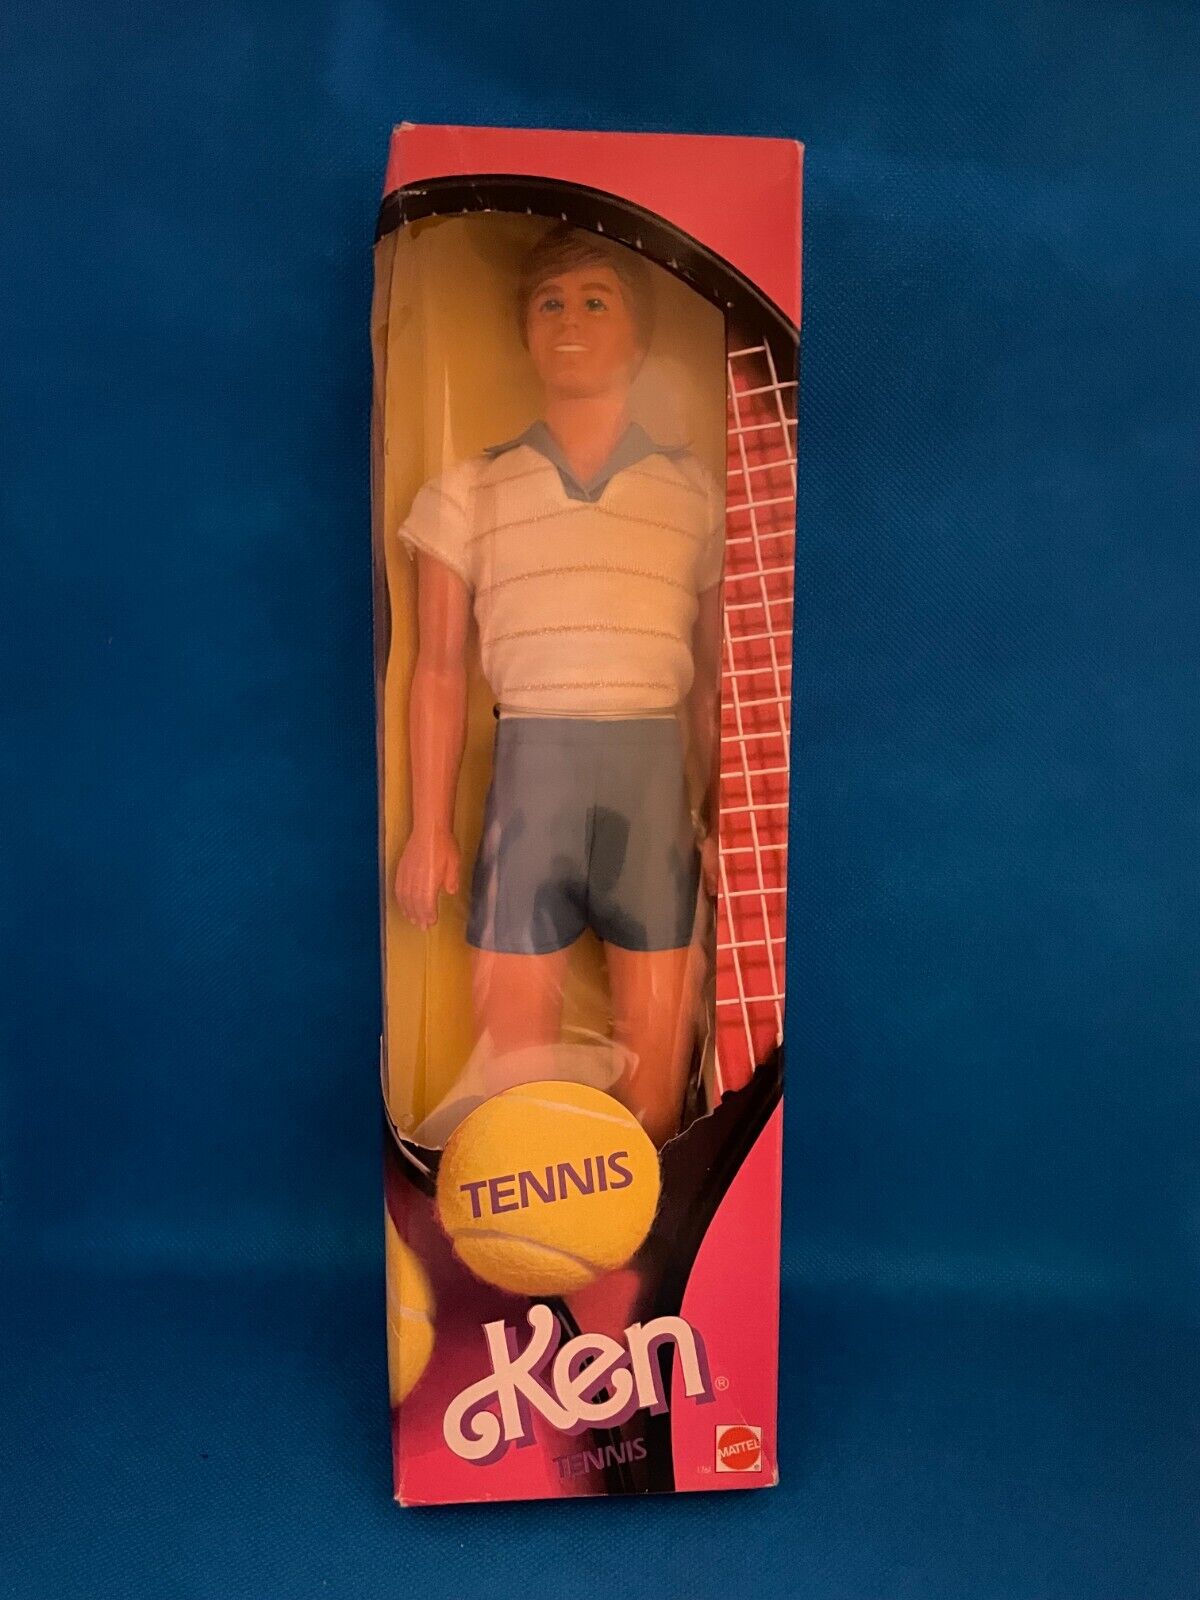 1986 Tennis Ken Barbie, NRFB, Perfect condition doll, rare foreign issue